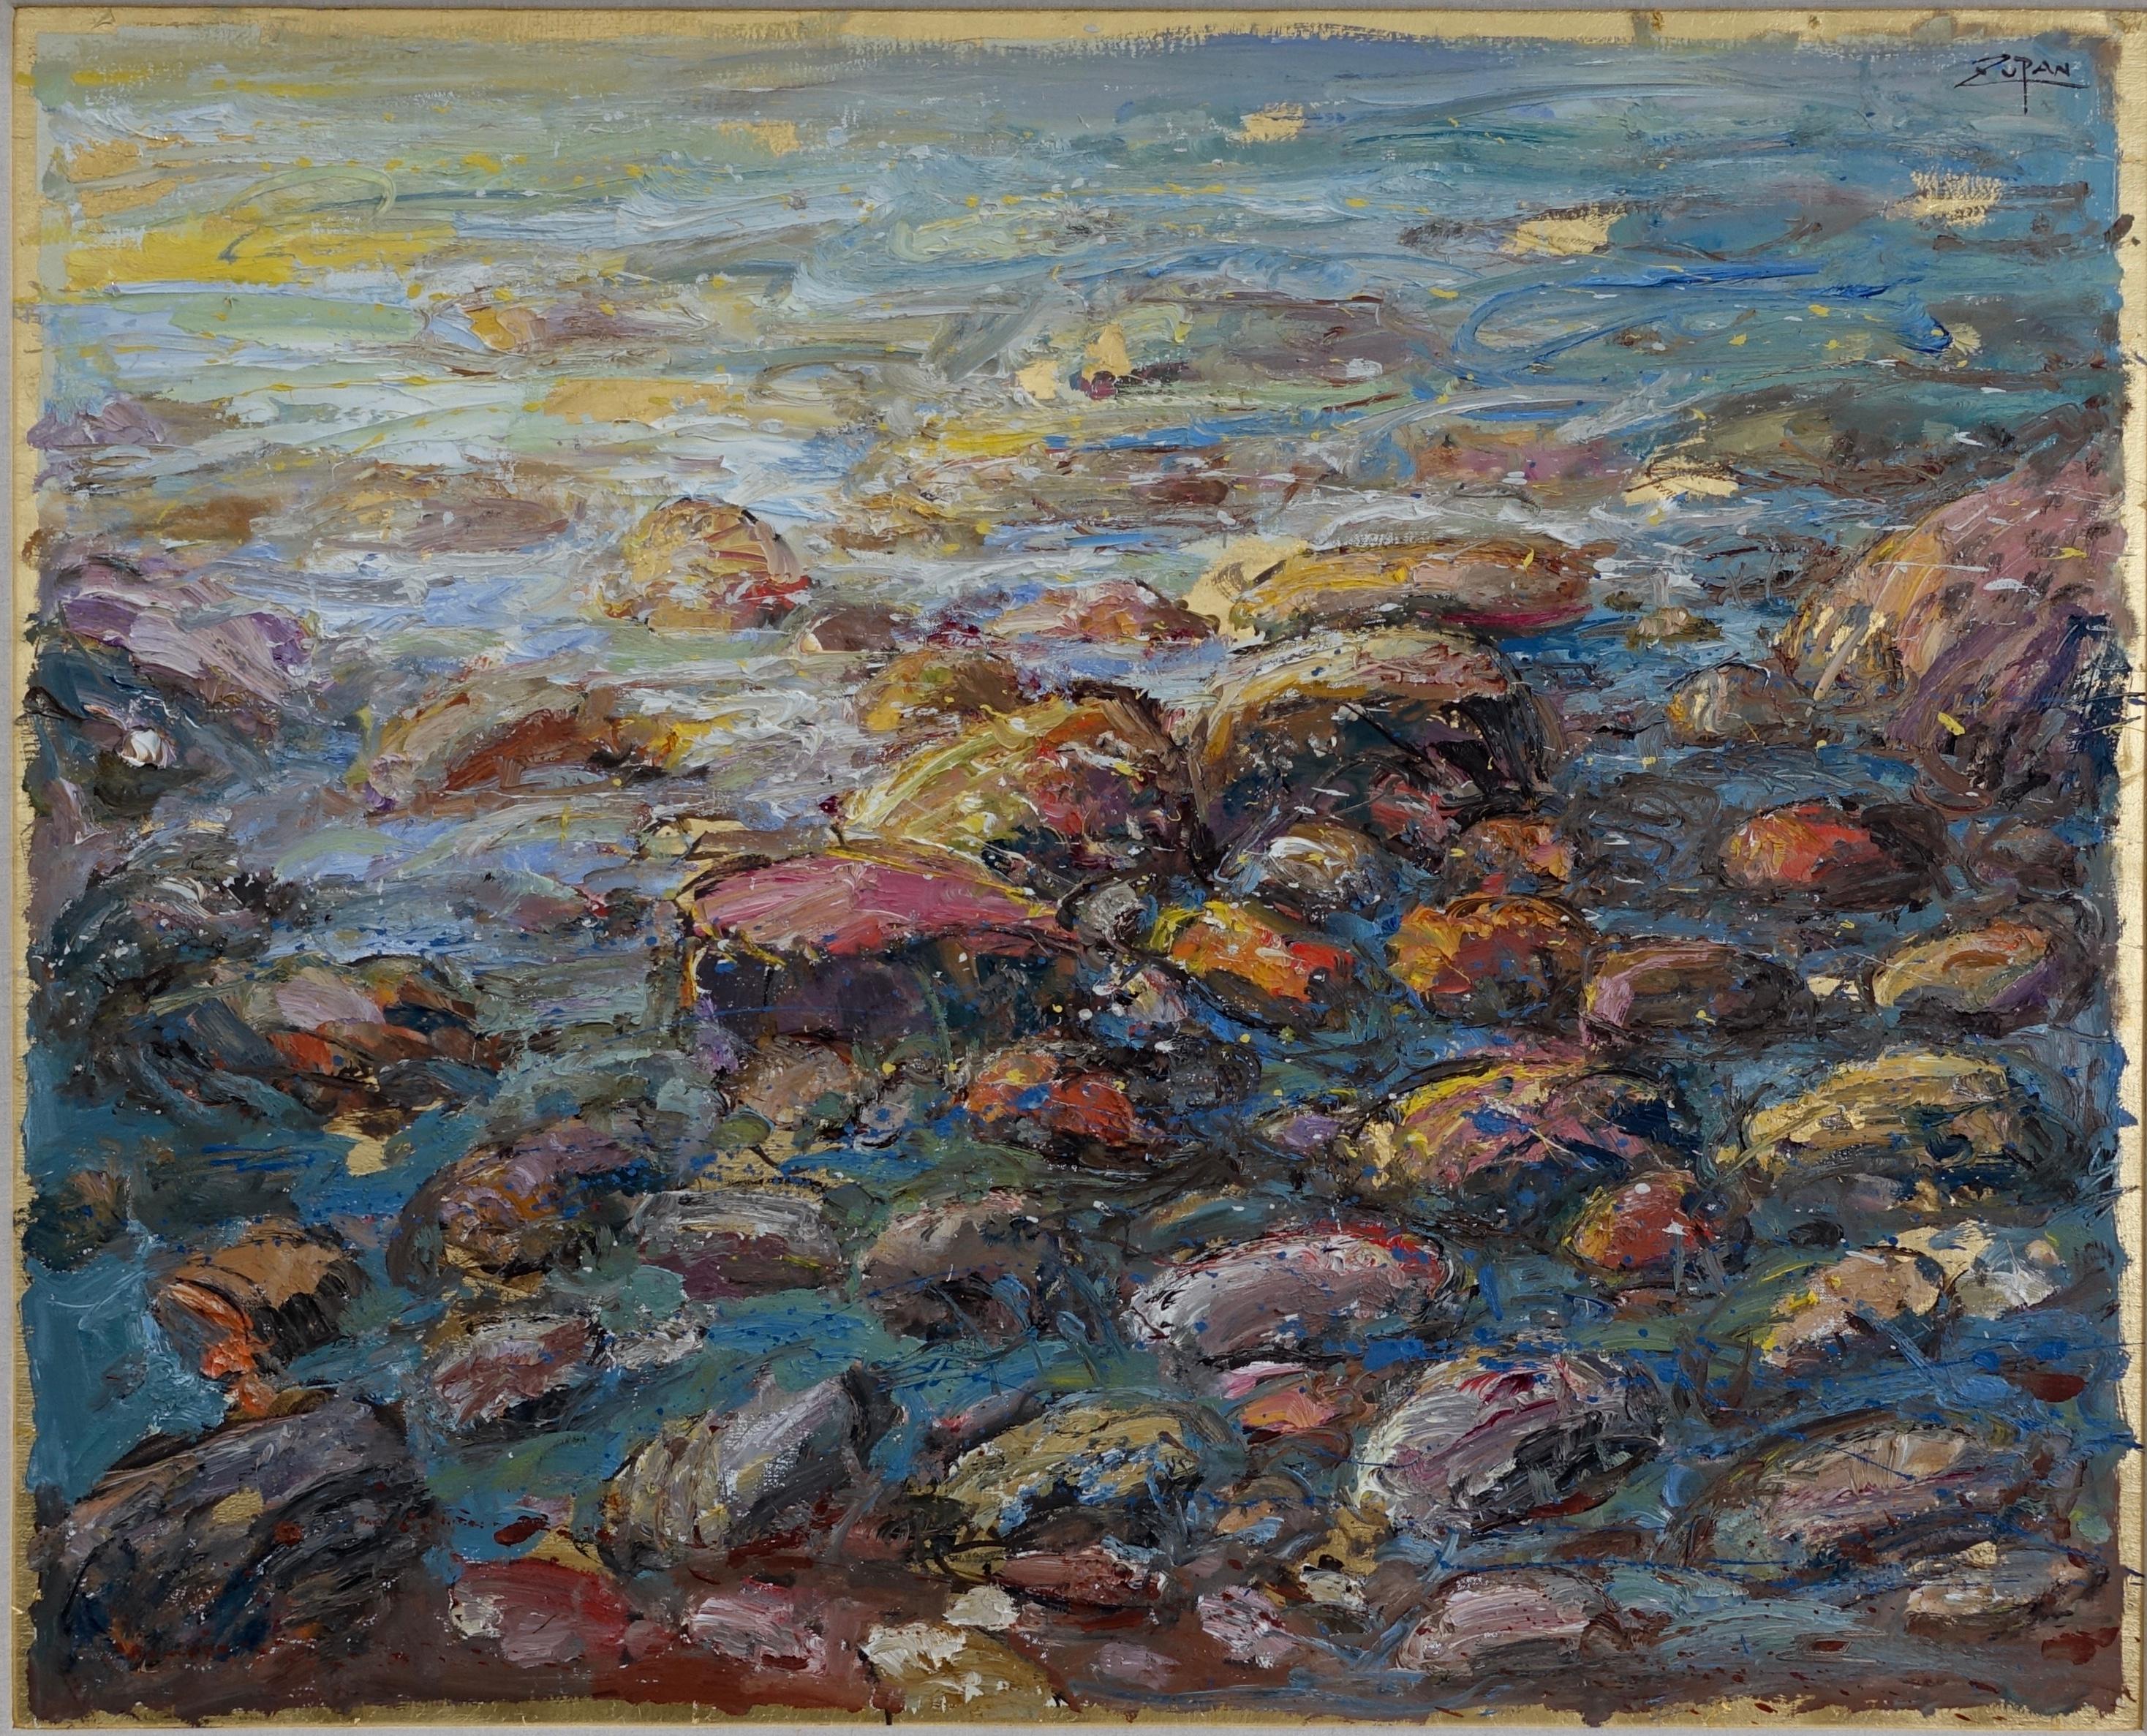 Bruno Zupan Landscape Painting - "Shore with Colored Stones"